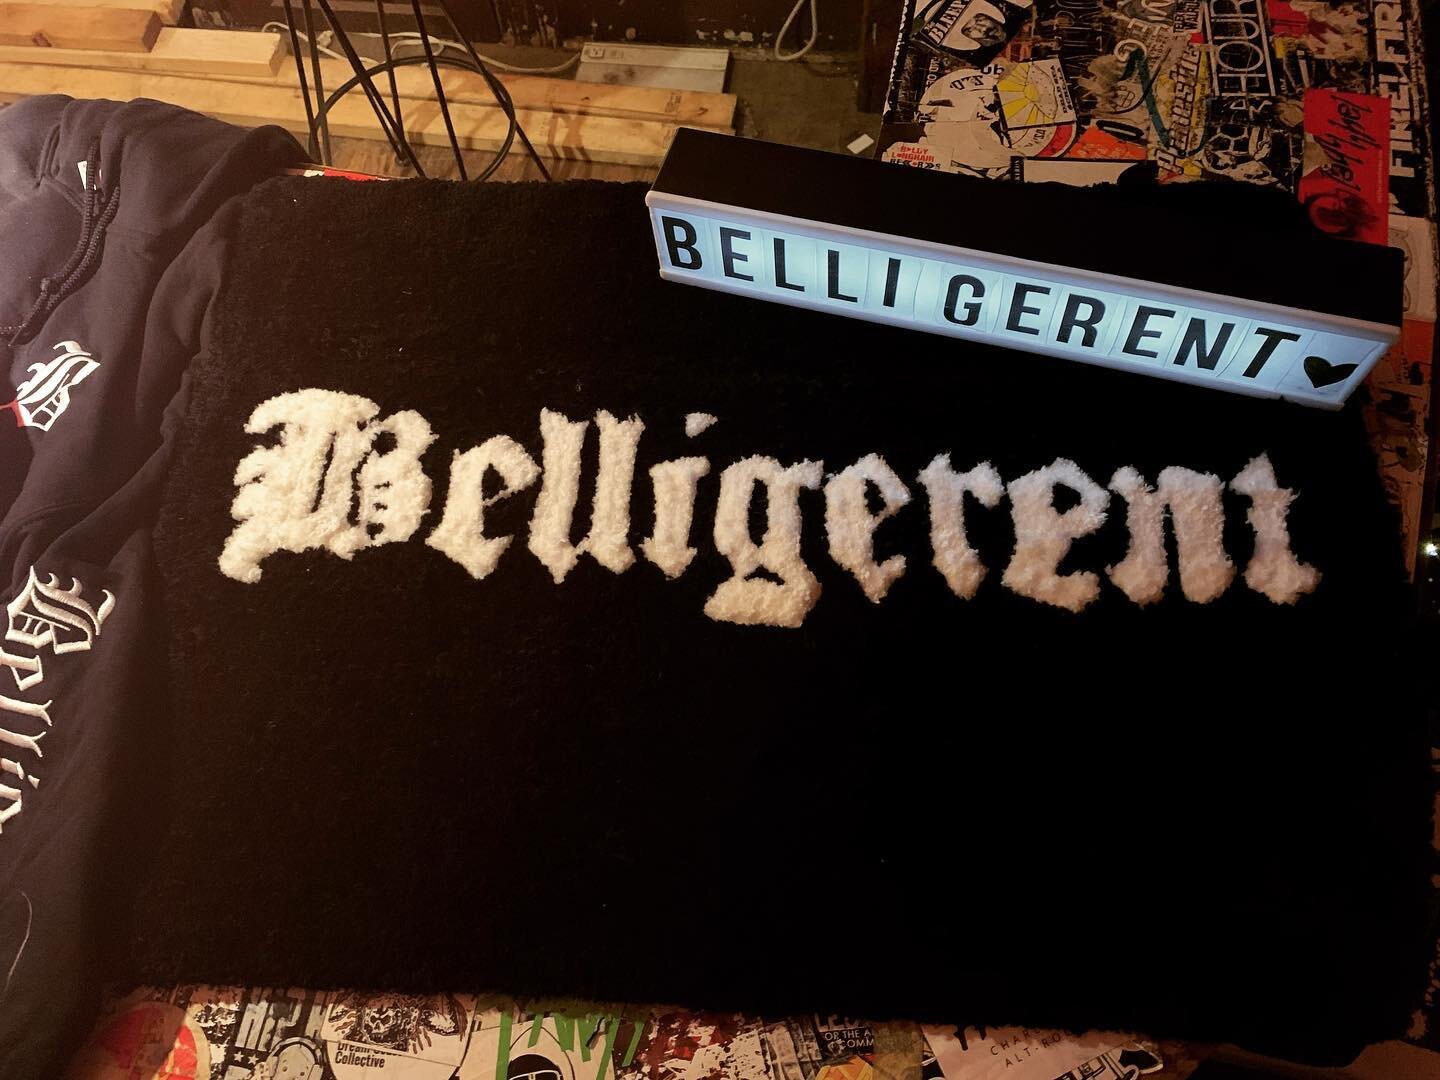 This one of a kind , hand made Belligerent rug is now available for purchase 👏🔥👏💸 $100 💸 If you are interested please DM us for more info ⛓⚔️⛓ Major shout out to @charles_huebert hit him up if you are looking for some custom rug work 💜 #bellige